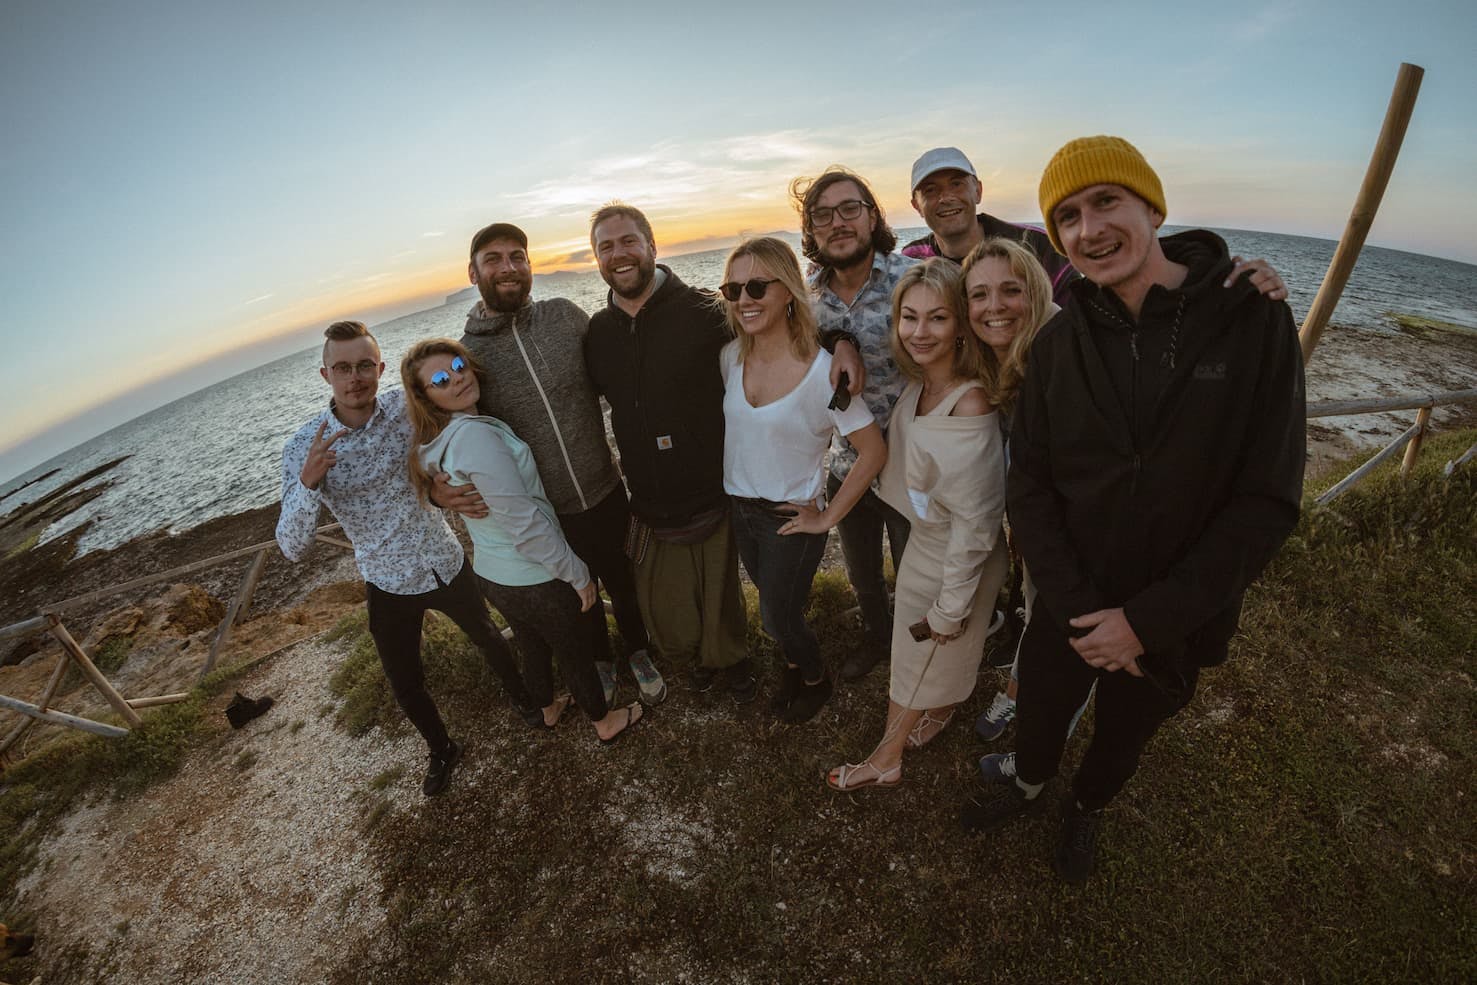 people in a group smiling with a sunset in the background